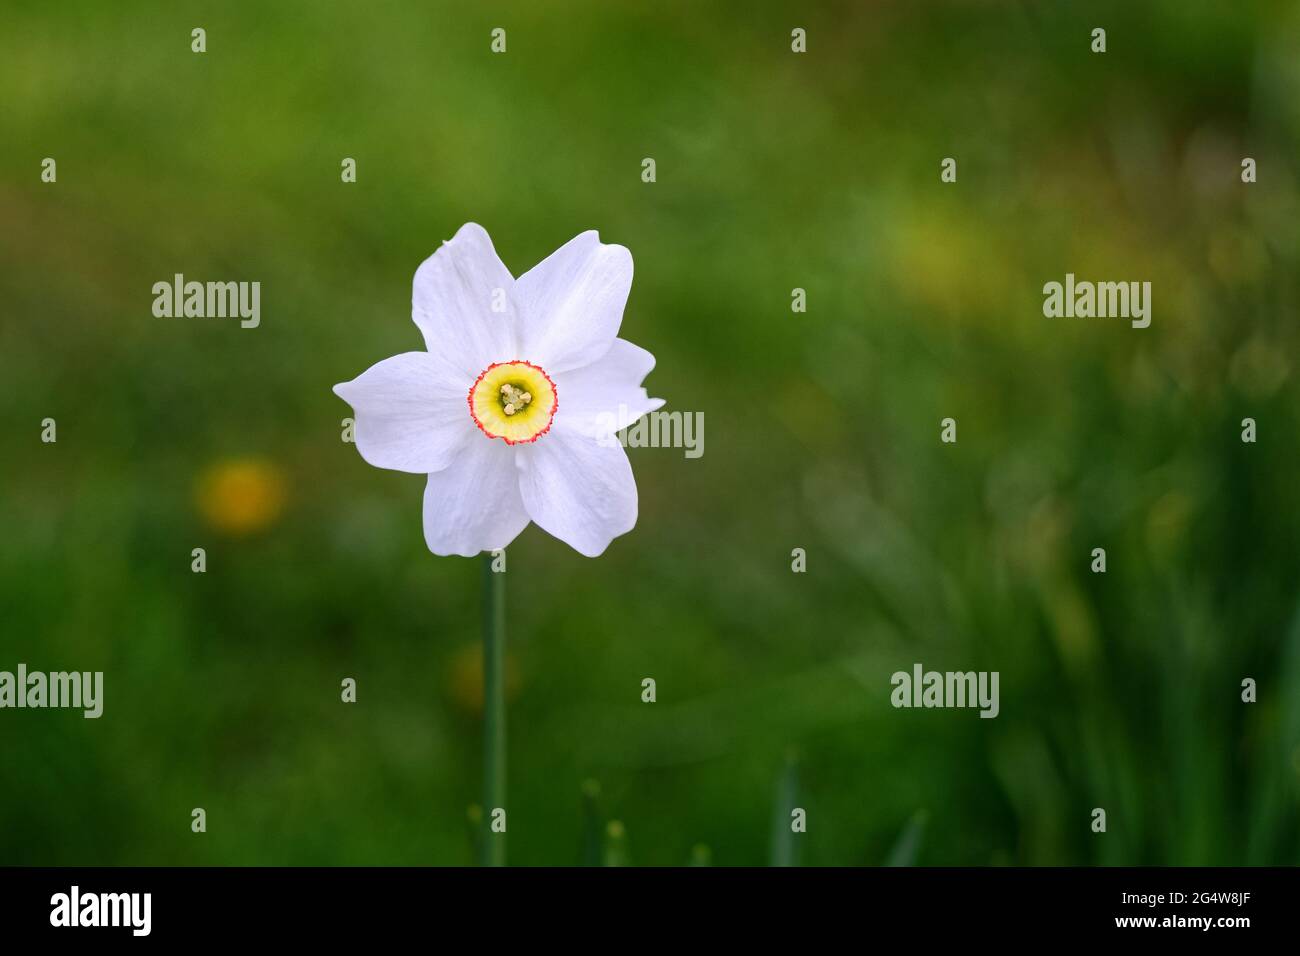 Bright blossoming white daffodil flower on a background of green grass. Stock Photo